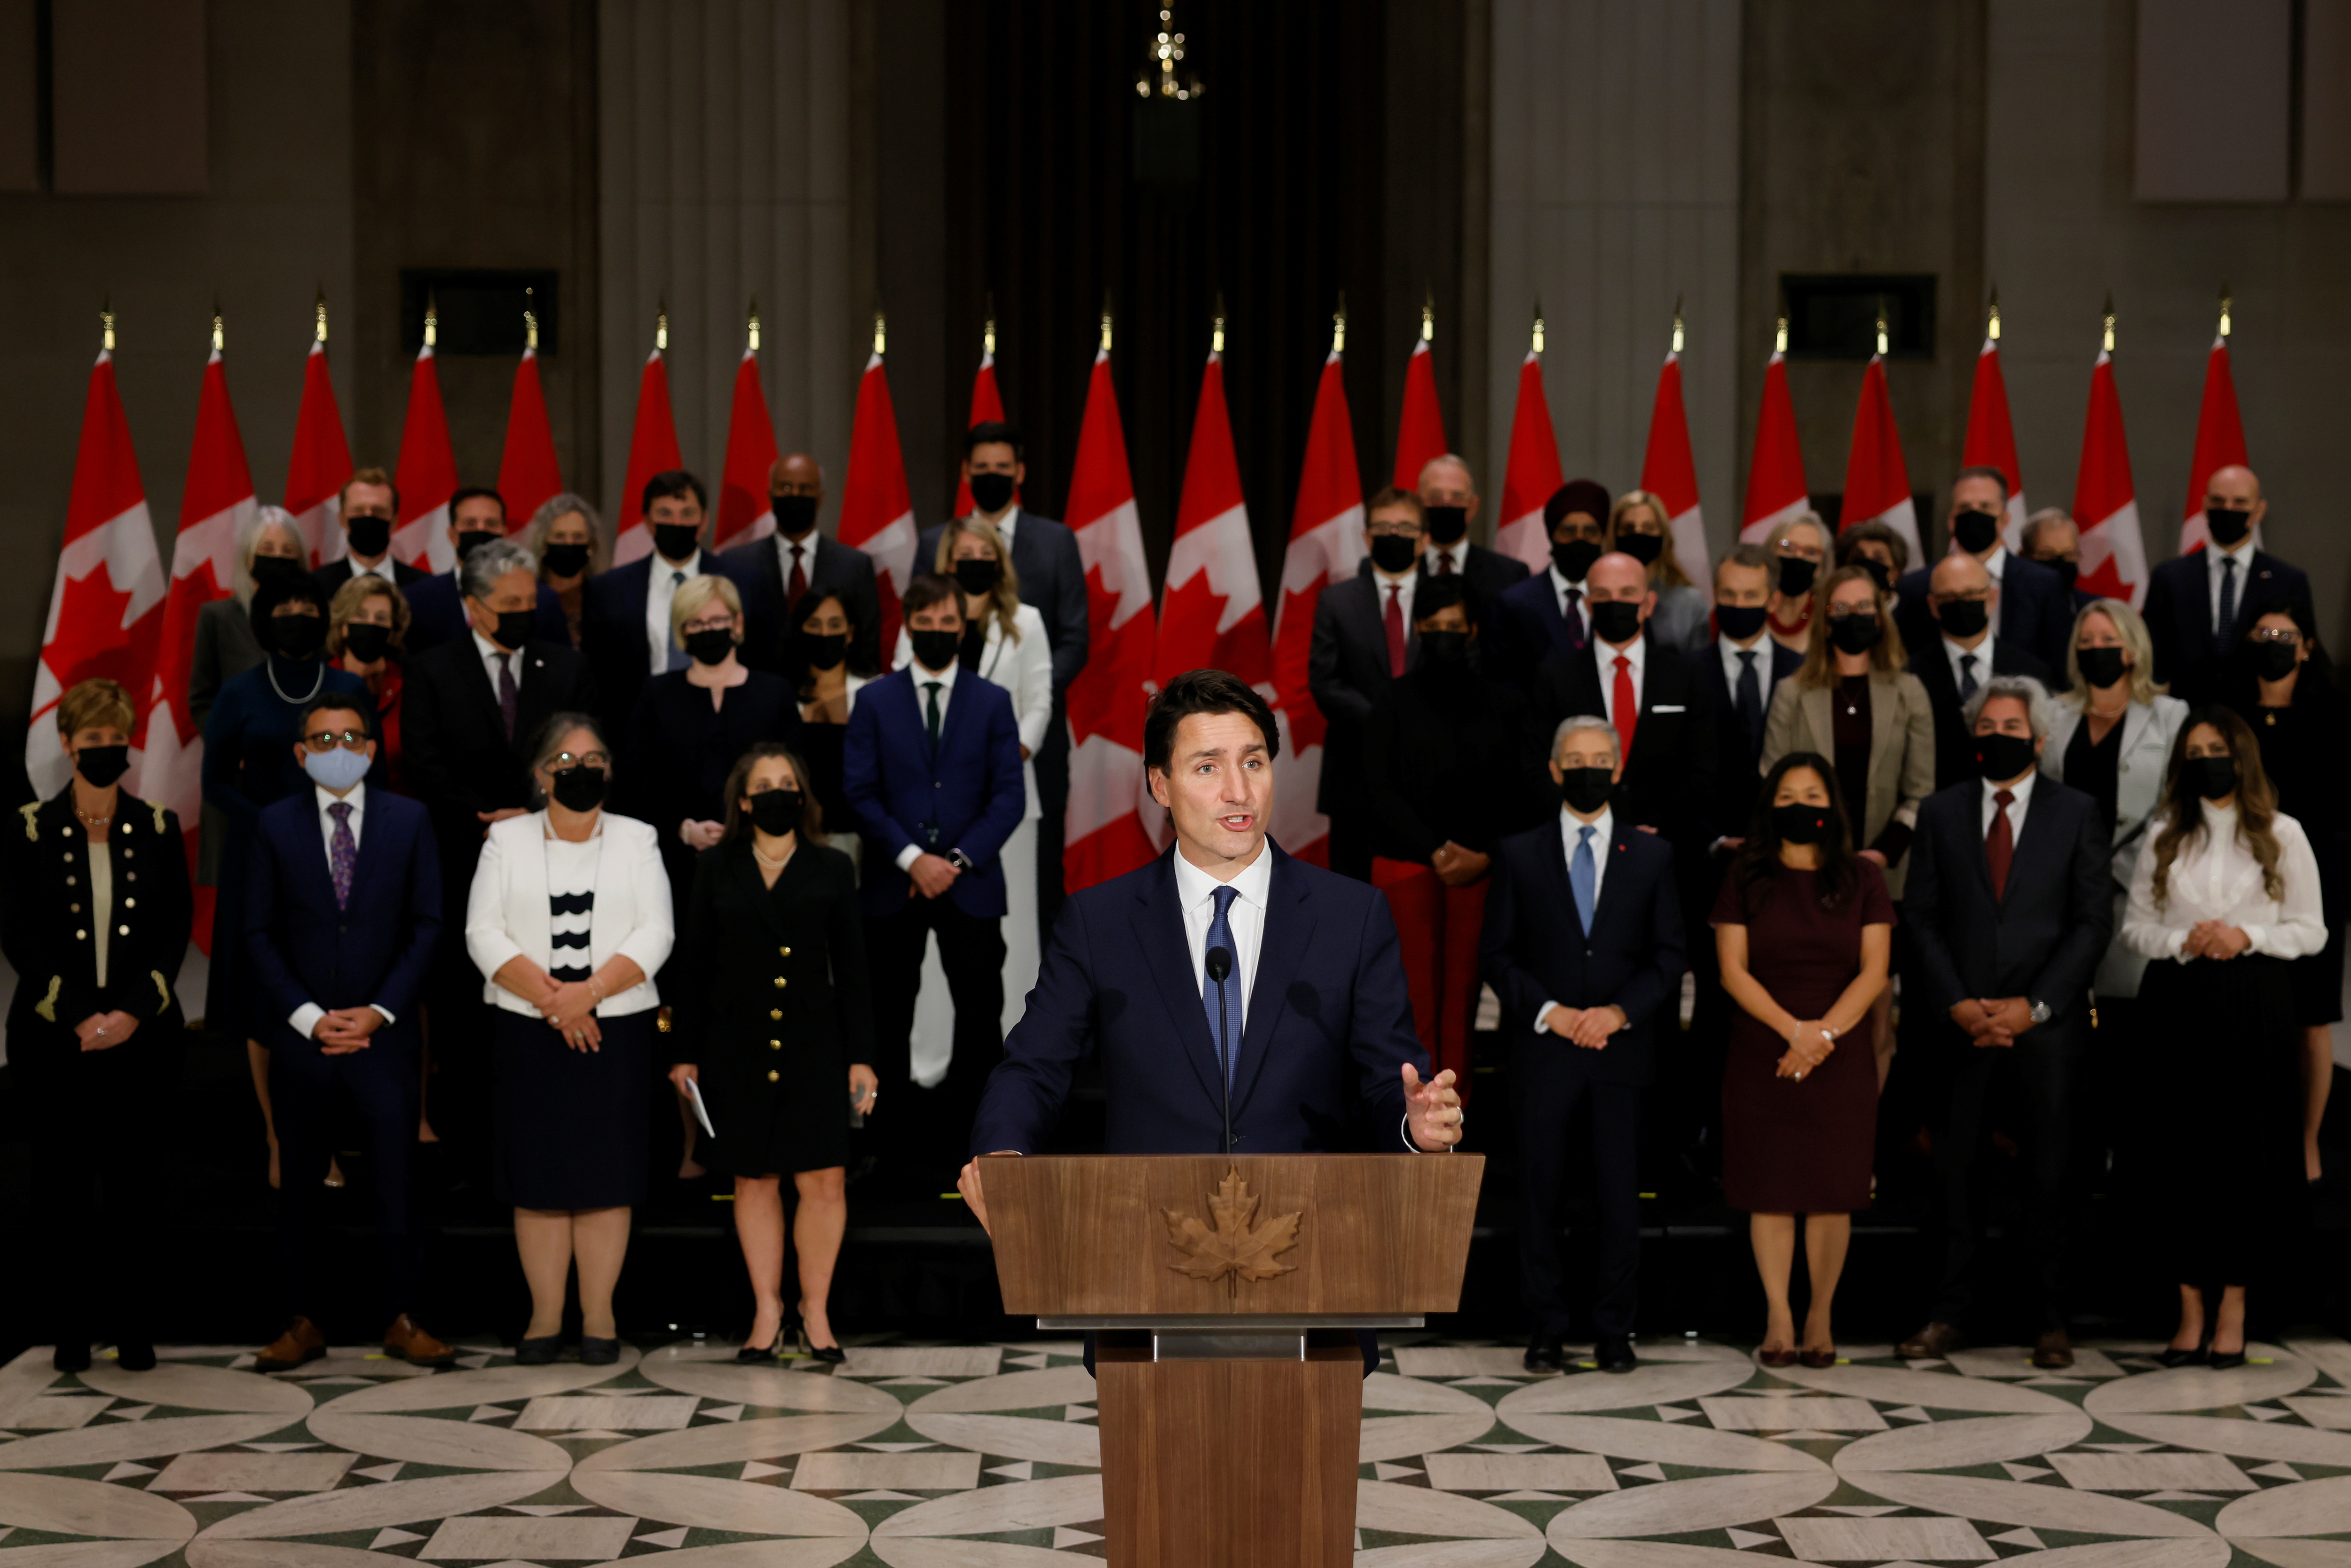 Canada's Prime Minister Justin Trudeau speaks during a news conference after the swearing-in of a new Cabinet in Ottawa, Ontario, Canada October 26, 2021. REUTERS/Blair Gable